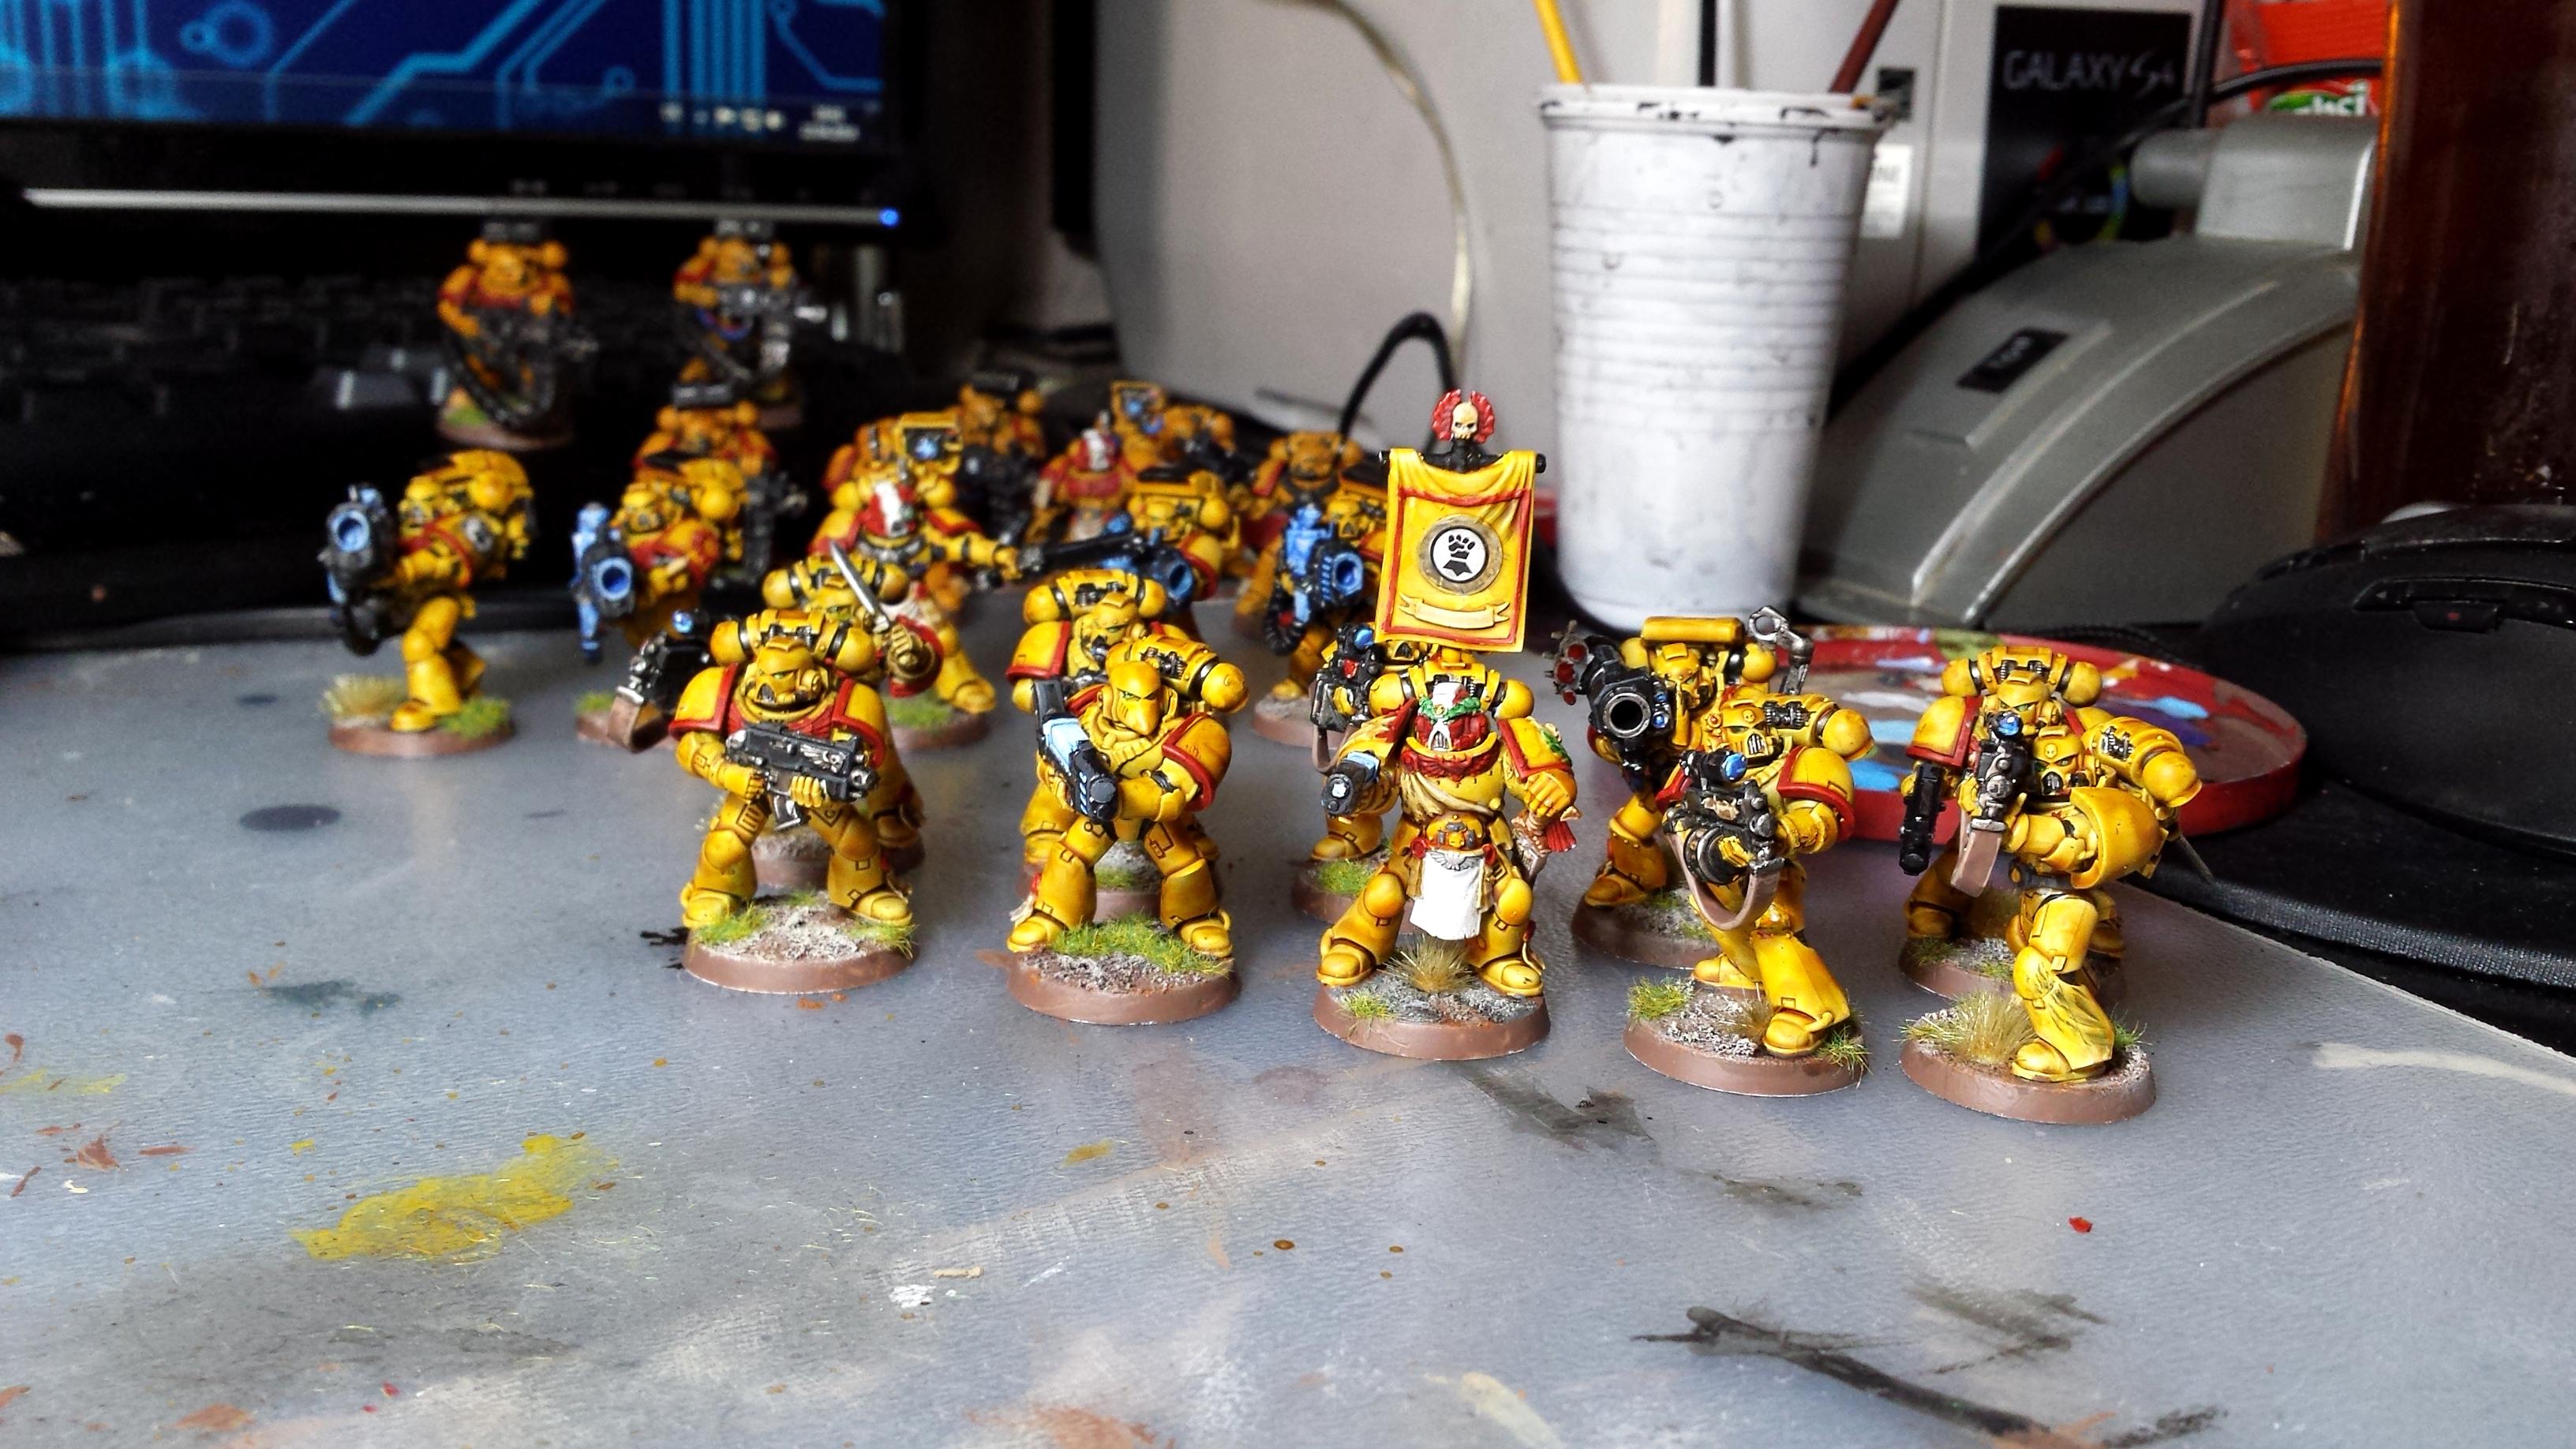 Excellent Highlighting, Excellent Low Lighting, Imperial Fists